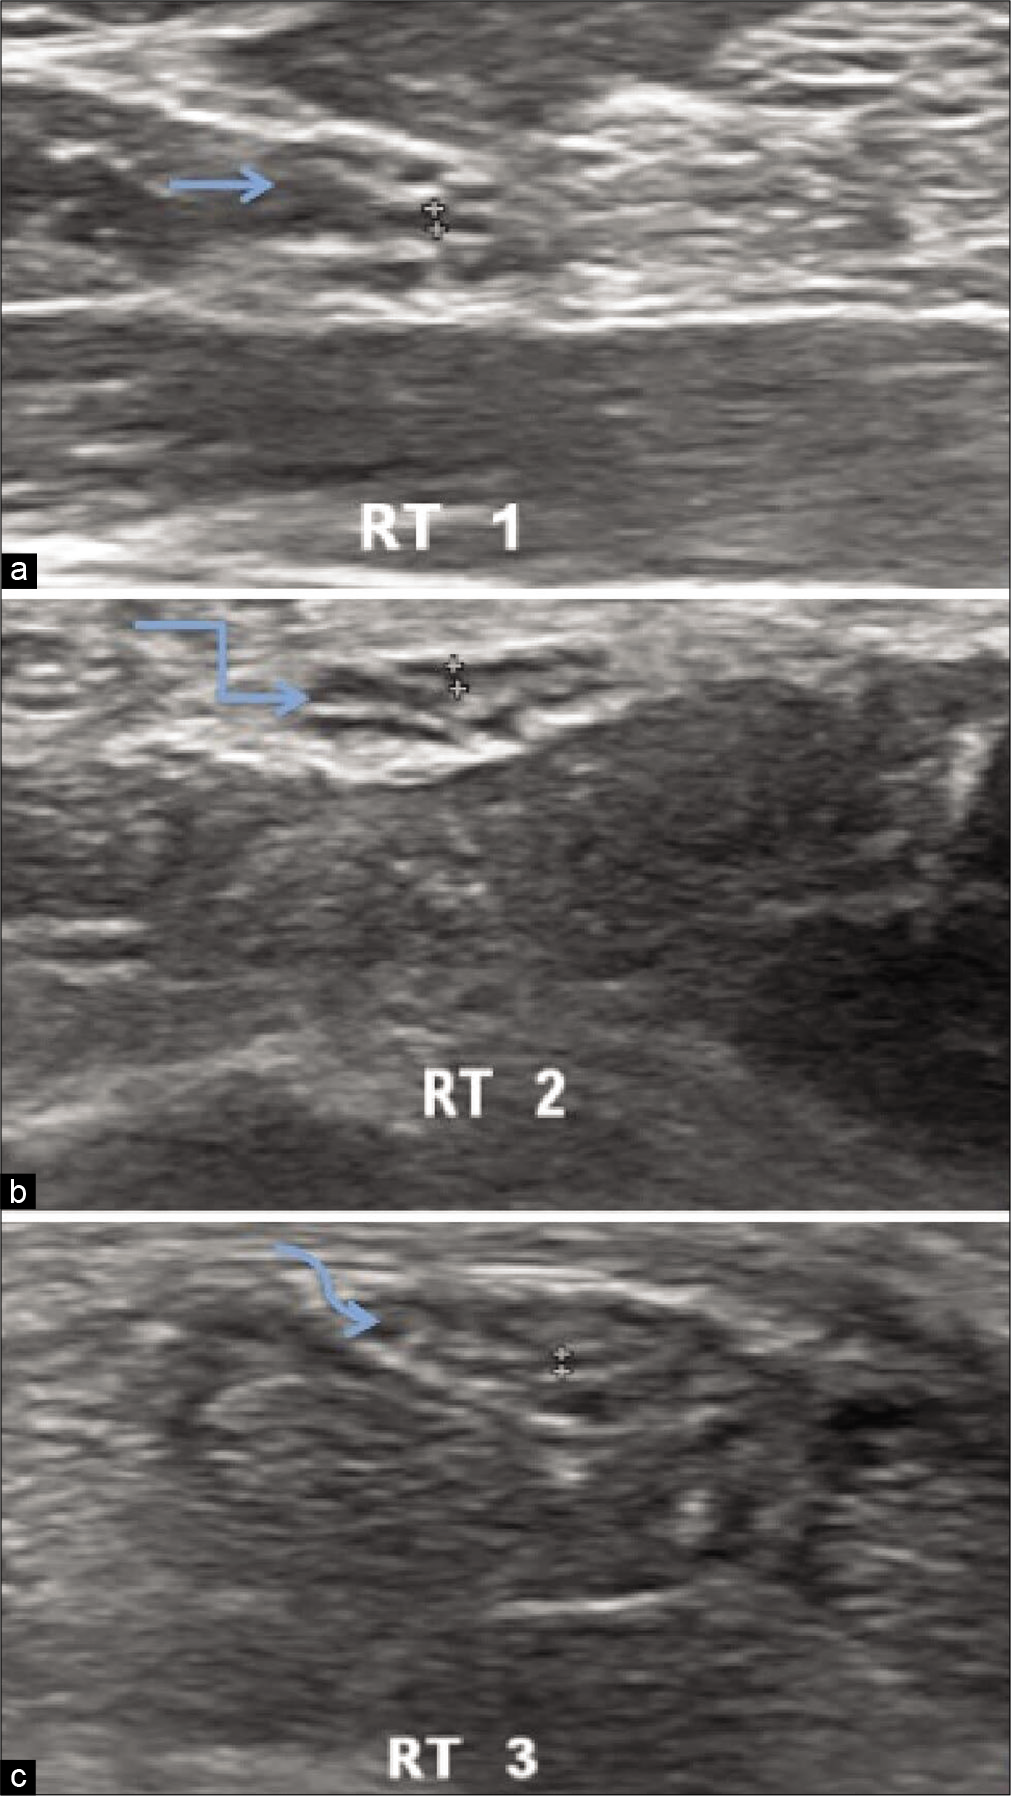 Ultrasonography of the Right median nerve of hypothyroidism patient showing hypoechoic median nerve fascicle thickness at three levels in distal forearm (a) Maximum thickness of nerve fascicle 0.035 cm at the level of pronator quadratus(straight arrow), (b) maximum thickness of nerve fascicle 0.043 cm proximal to carpal tunnel inlet(bent arrow), (c) maximum nerve fascicle thickness 0.033 cm distal to carpal tunnel outlet(curved arrow).